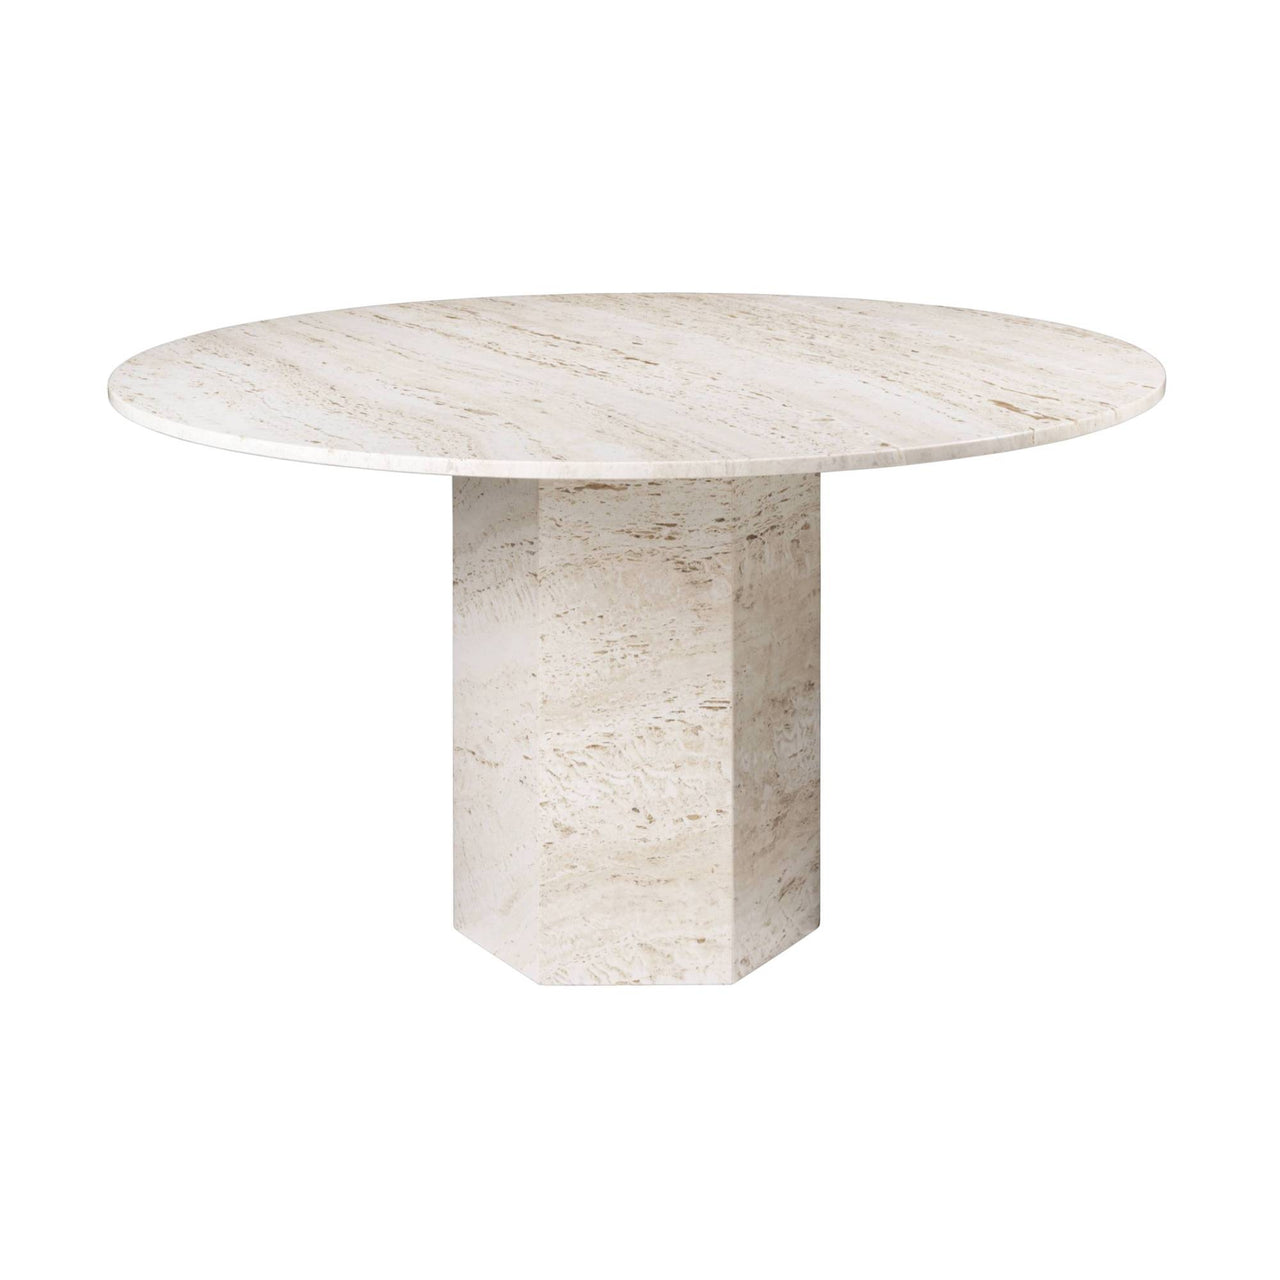 Epic Round Dining Table: Travertine + Neutral White